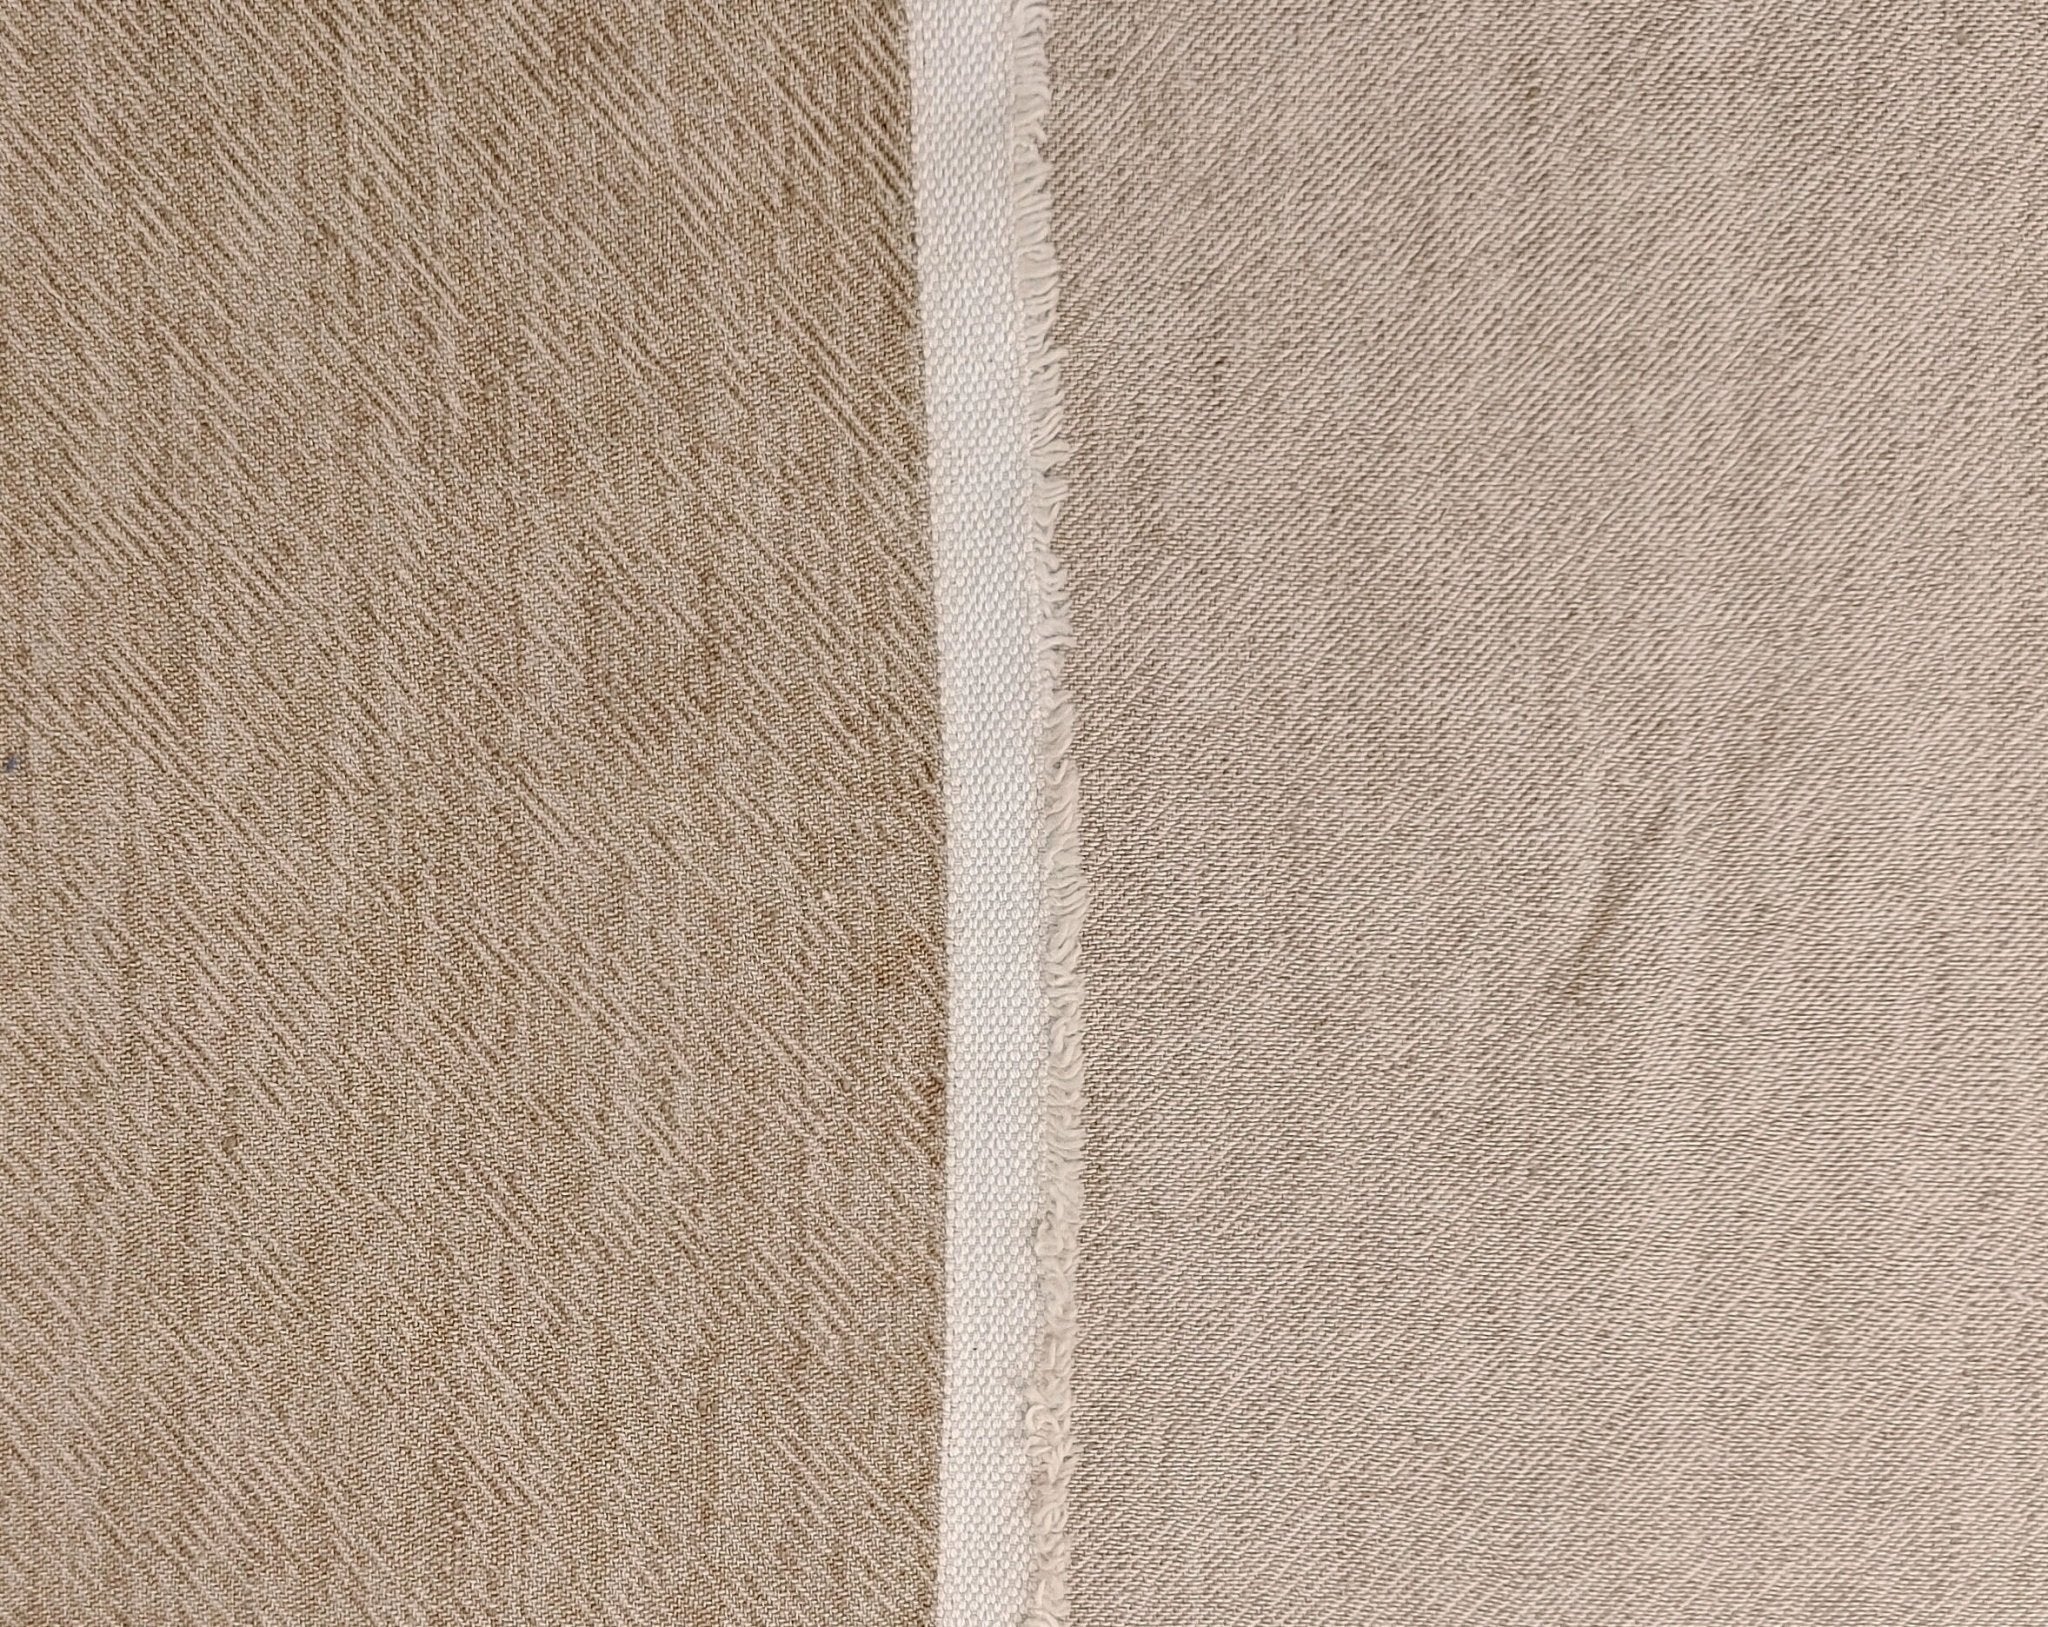 Heavyweight Linen Cotton Twill Fabric with Two-Tone Chambray 7258 7259 7331 7332 - The Linen Lab - Beige